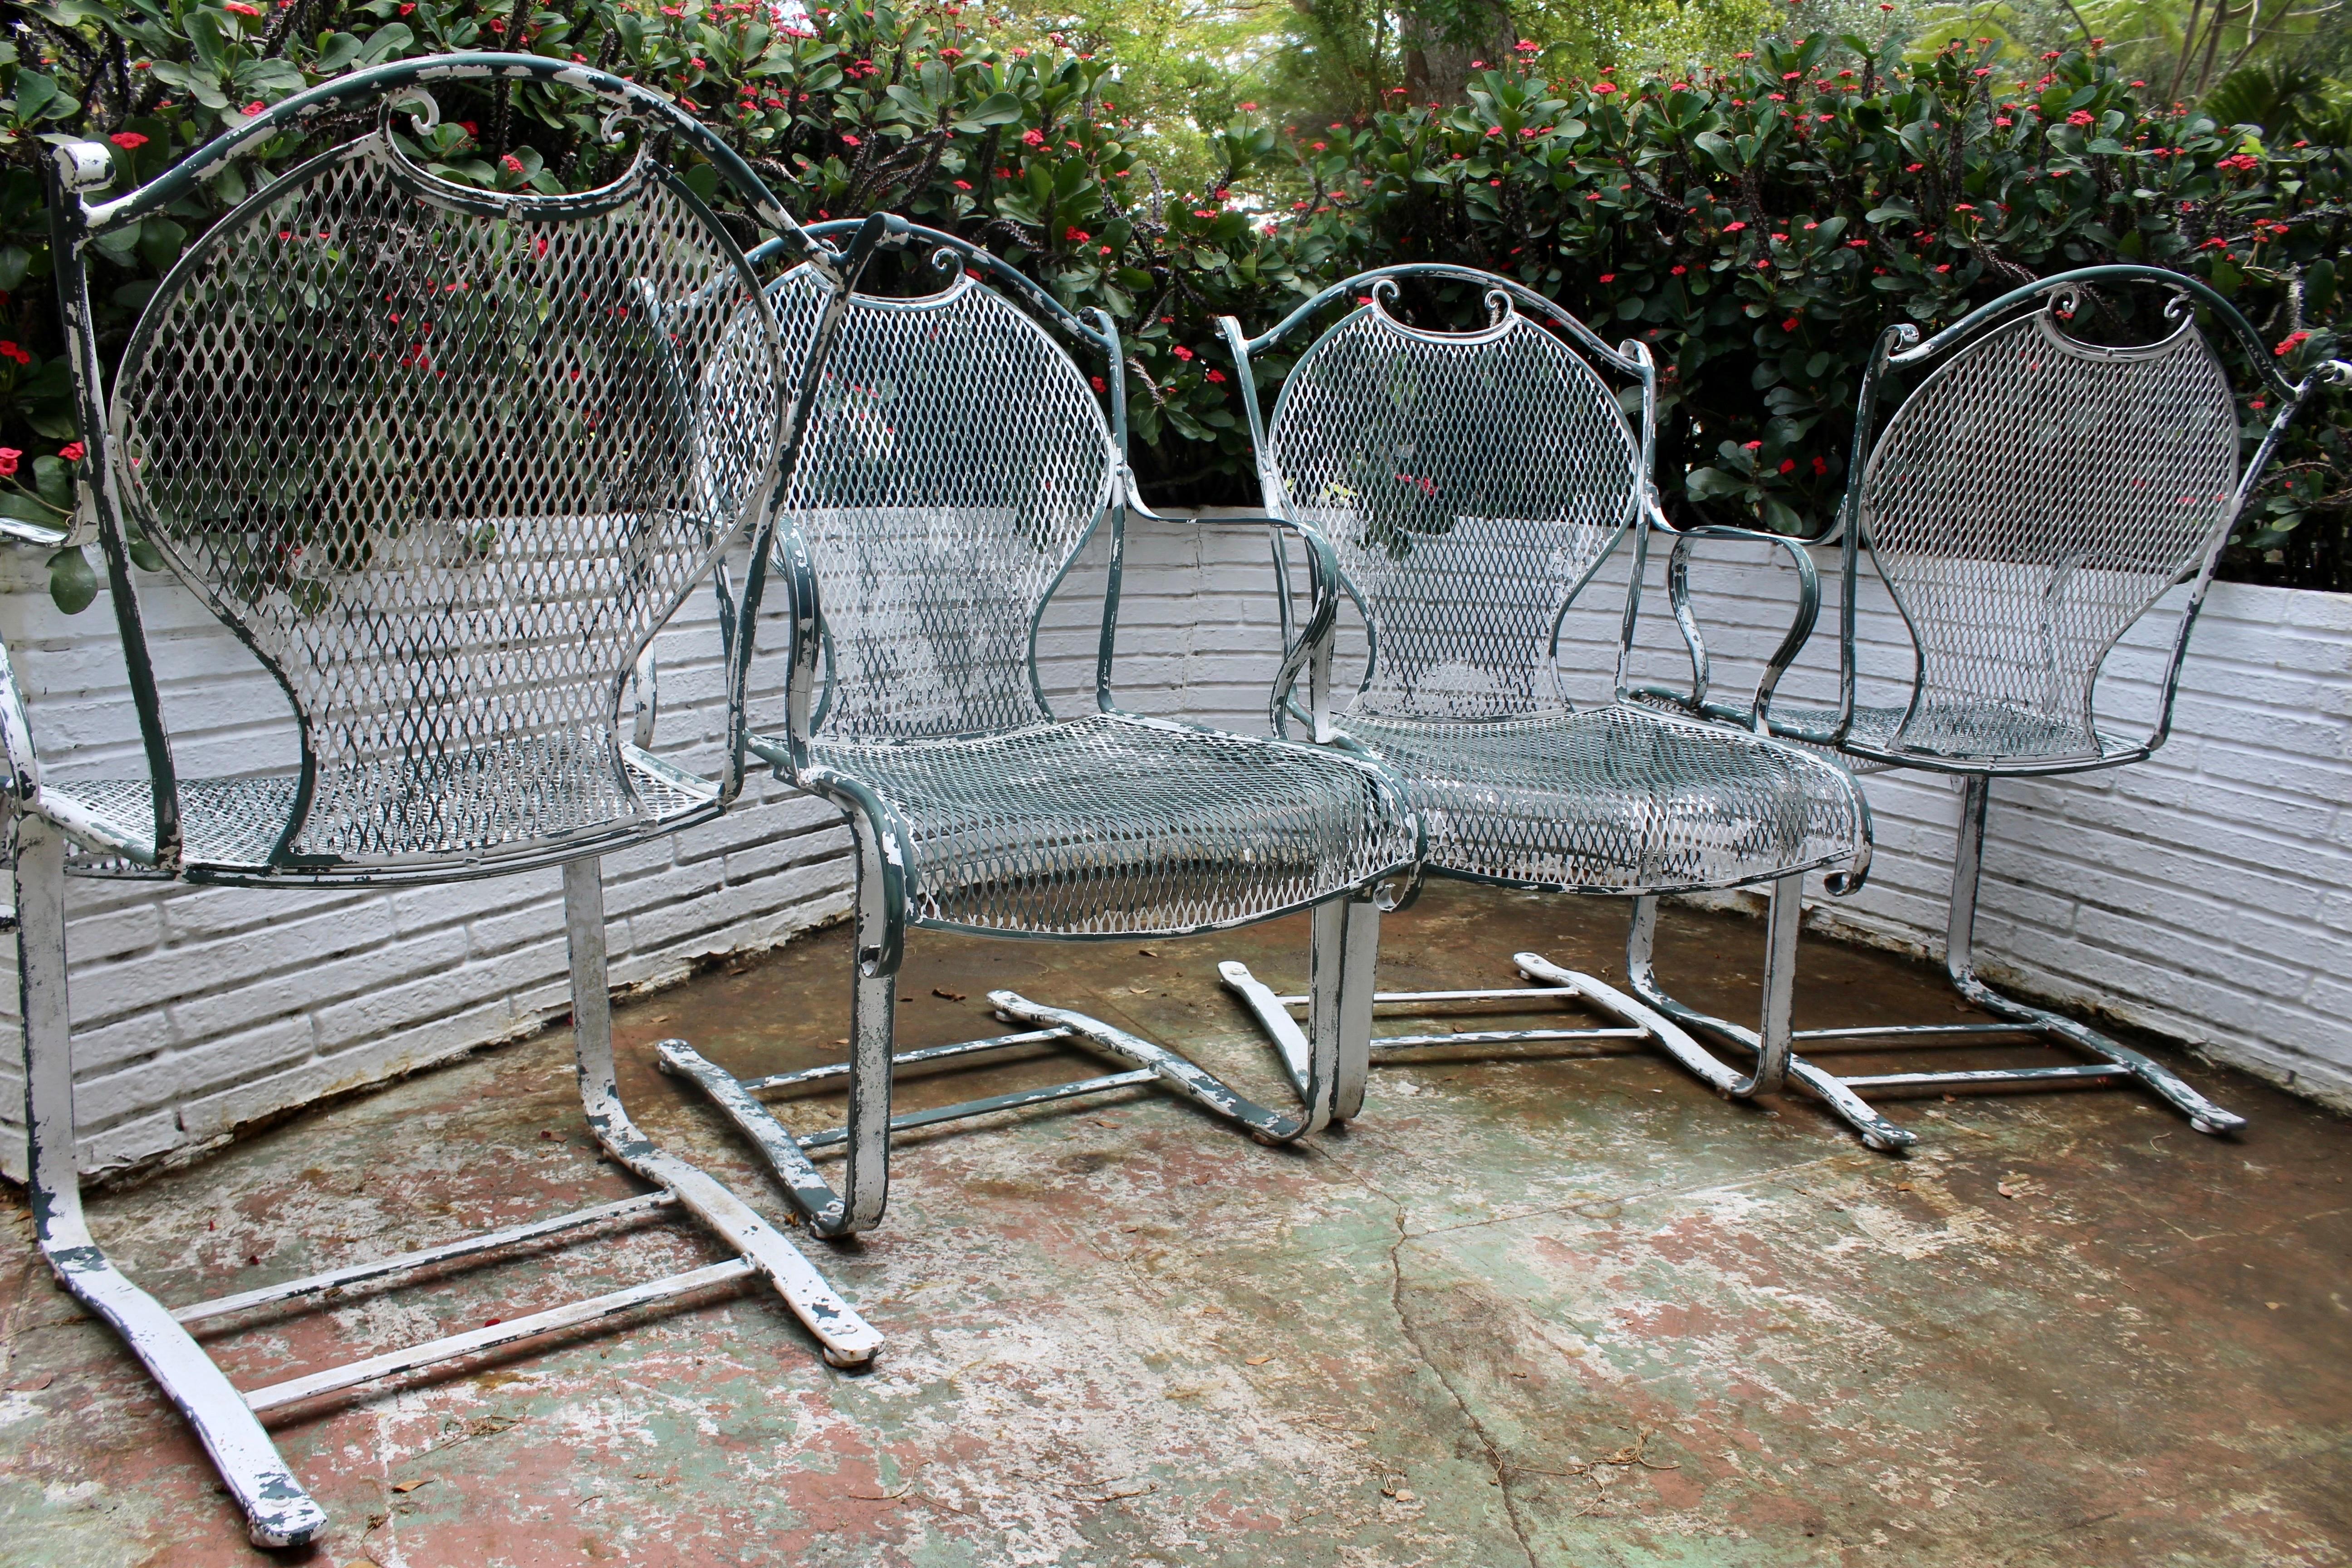 Large well made vintage Midcentury Modern Wrought Iron Mesh Bouncy Rocking Arm Chairs Set of 4. Styled after Russell Woodward. Original Florida green paint can be restored for a more modern look or retained for a true vintage feel. High back